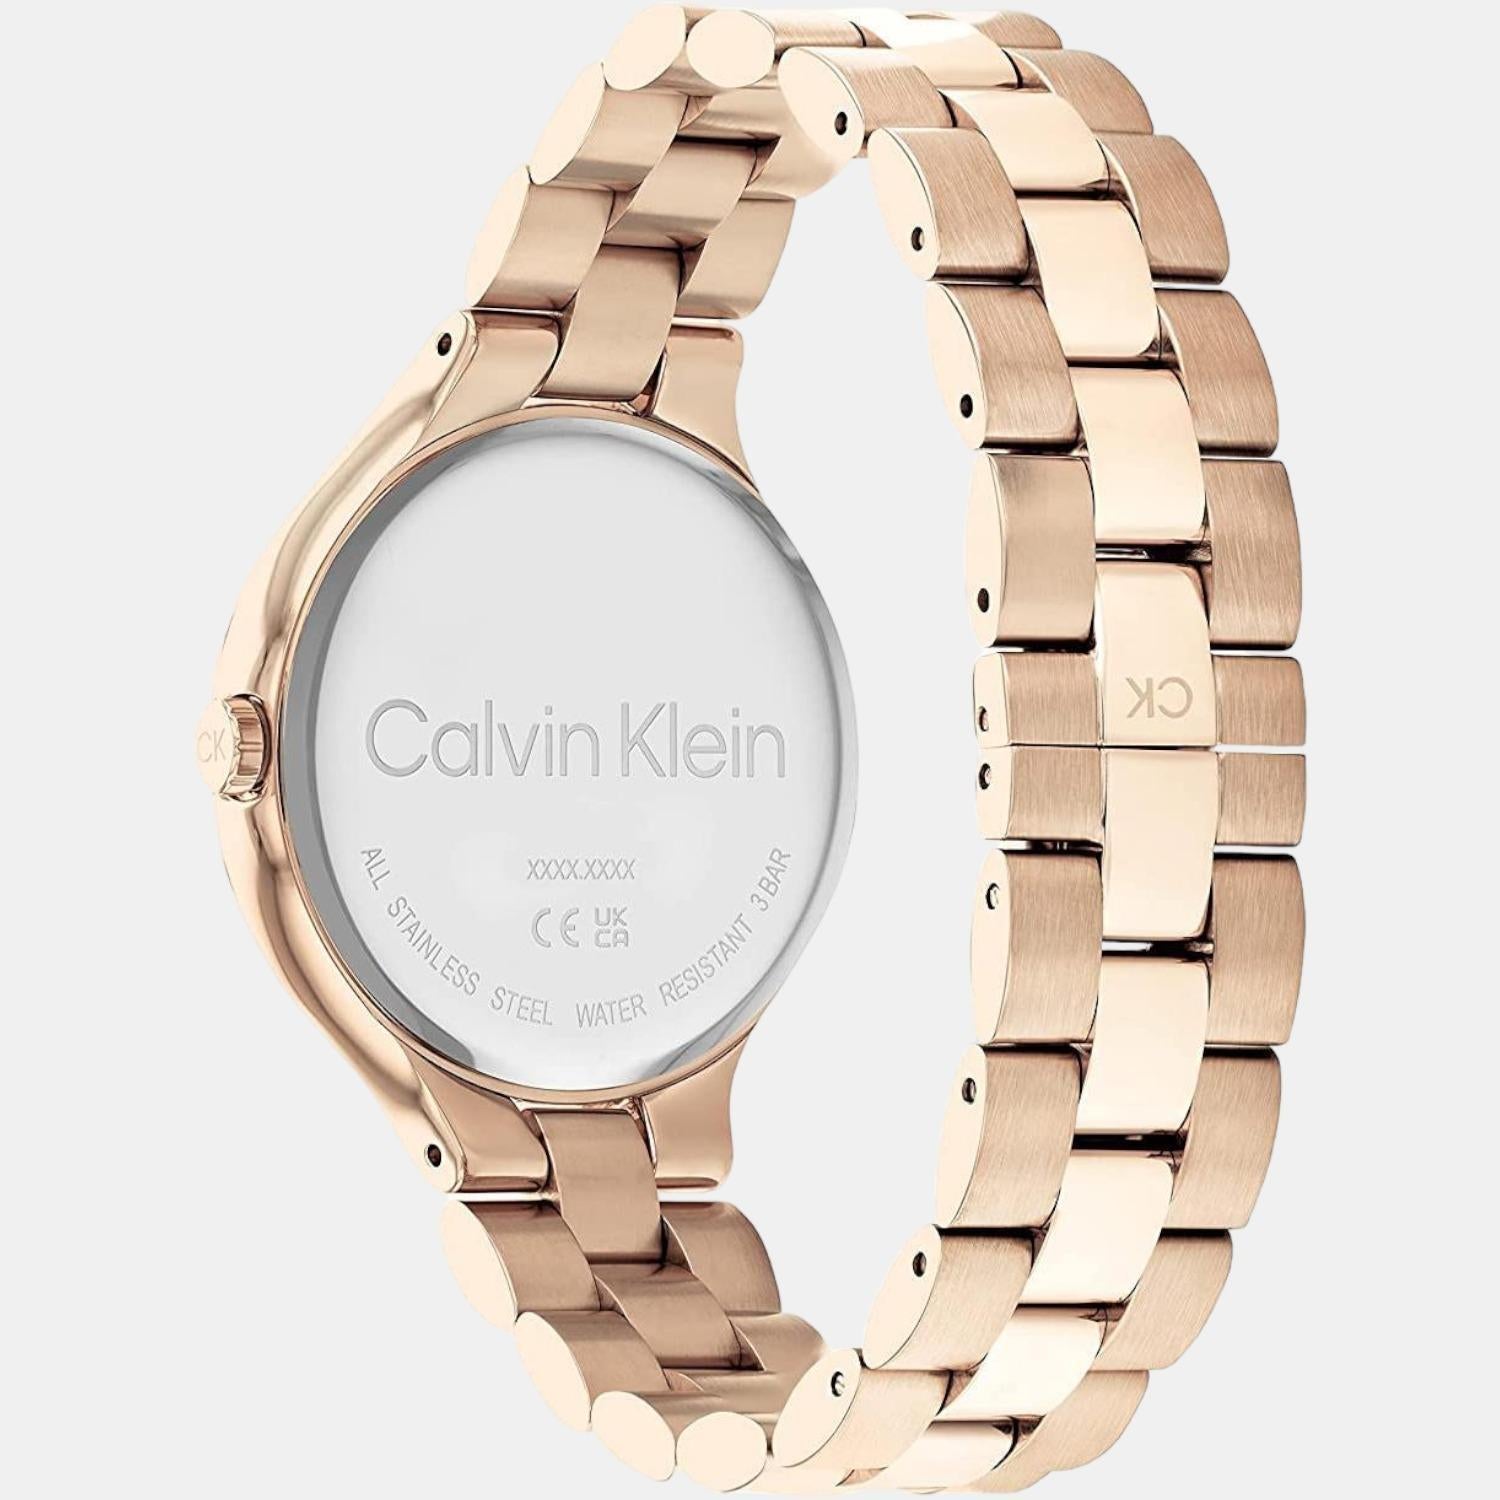 Calvin Klein Classic Men's Watch MM.38. New collection